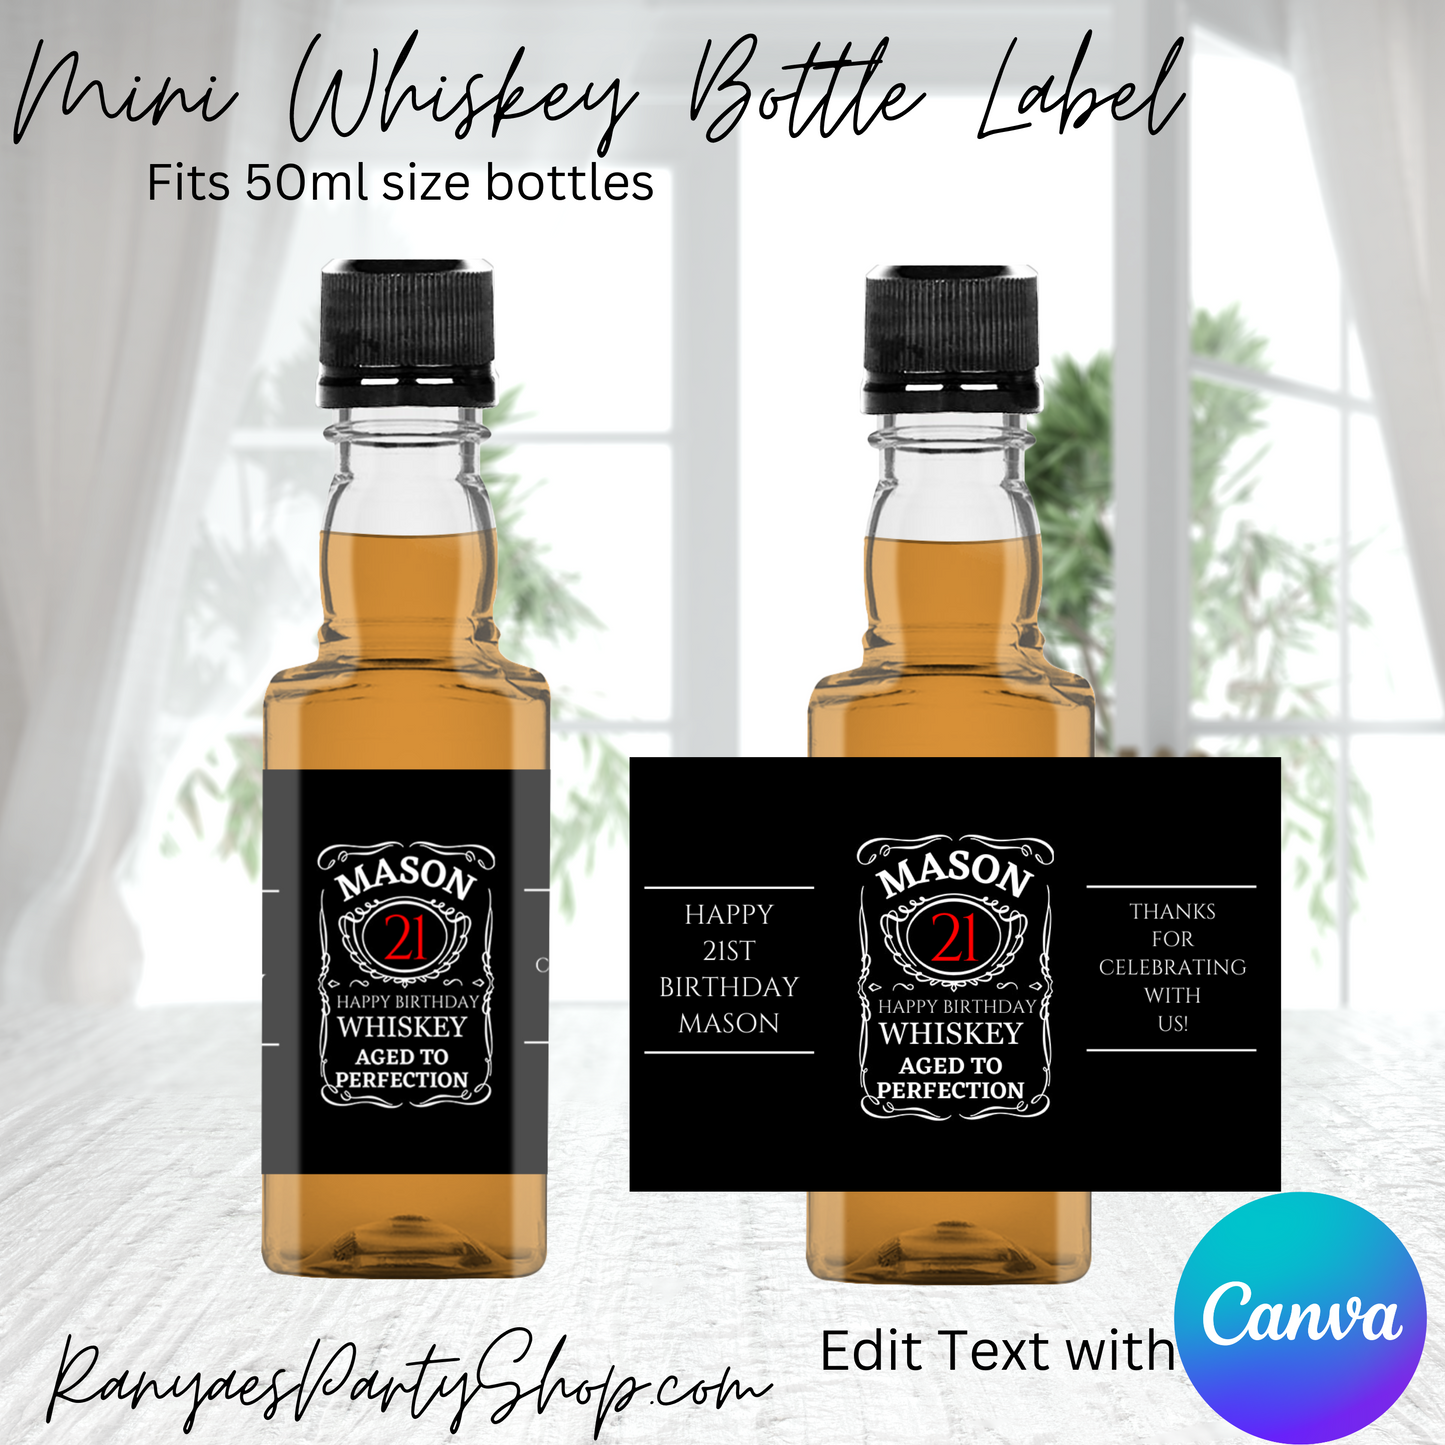 Mini Whiskey Bottle Label | Editable Text with Canva | Fits 50ml Size Bottles | Adult Favors | Edit | Save | Download | Print